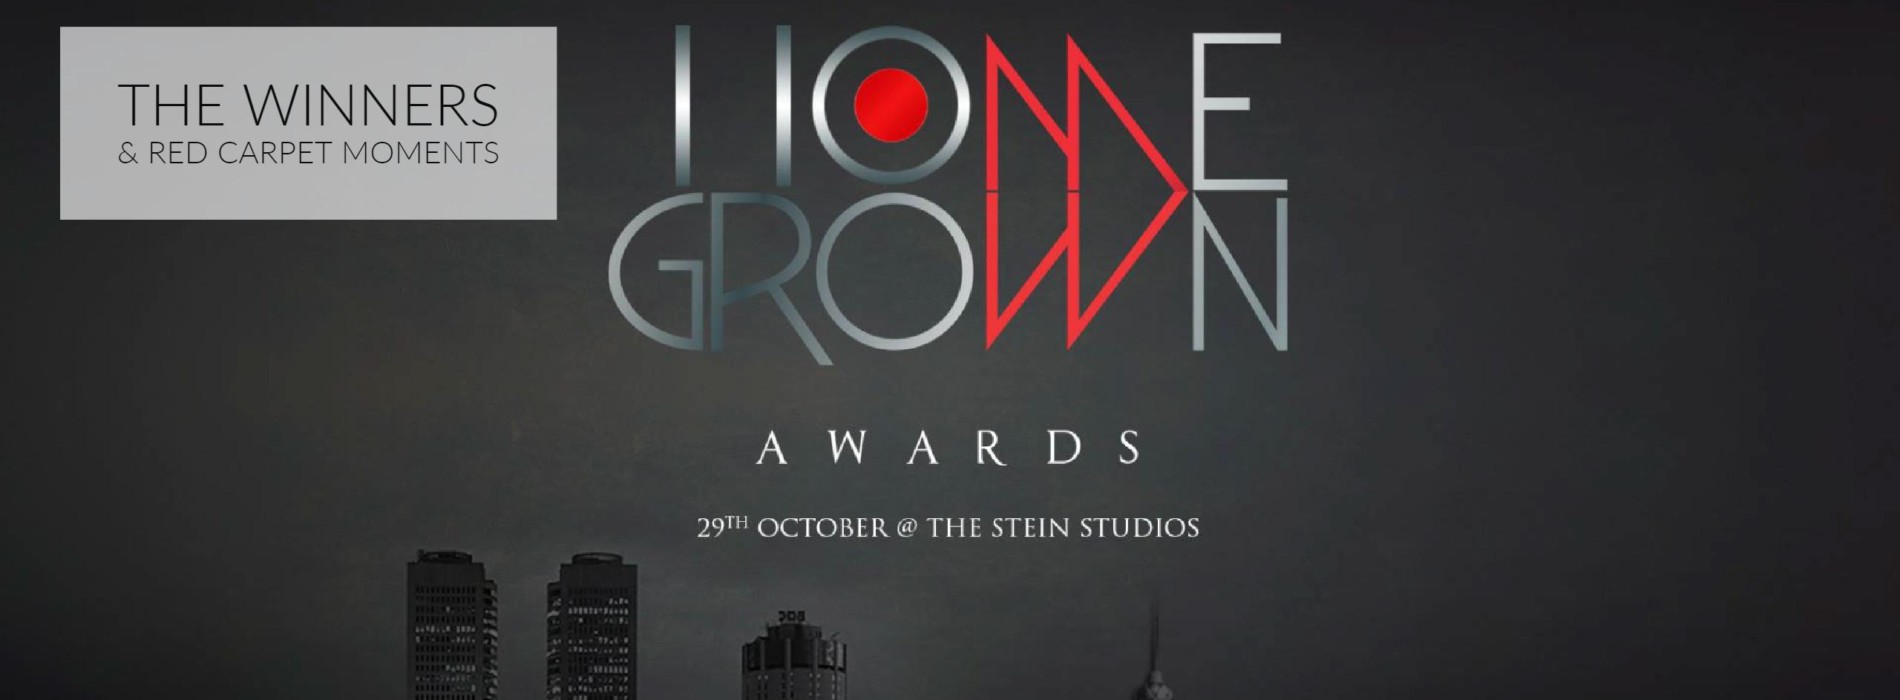 The YES Home Grown Awards 2017 – The Results & Red Carpet Captures